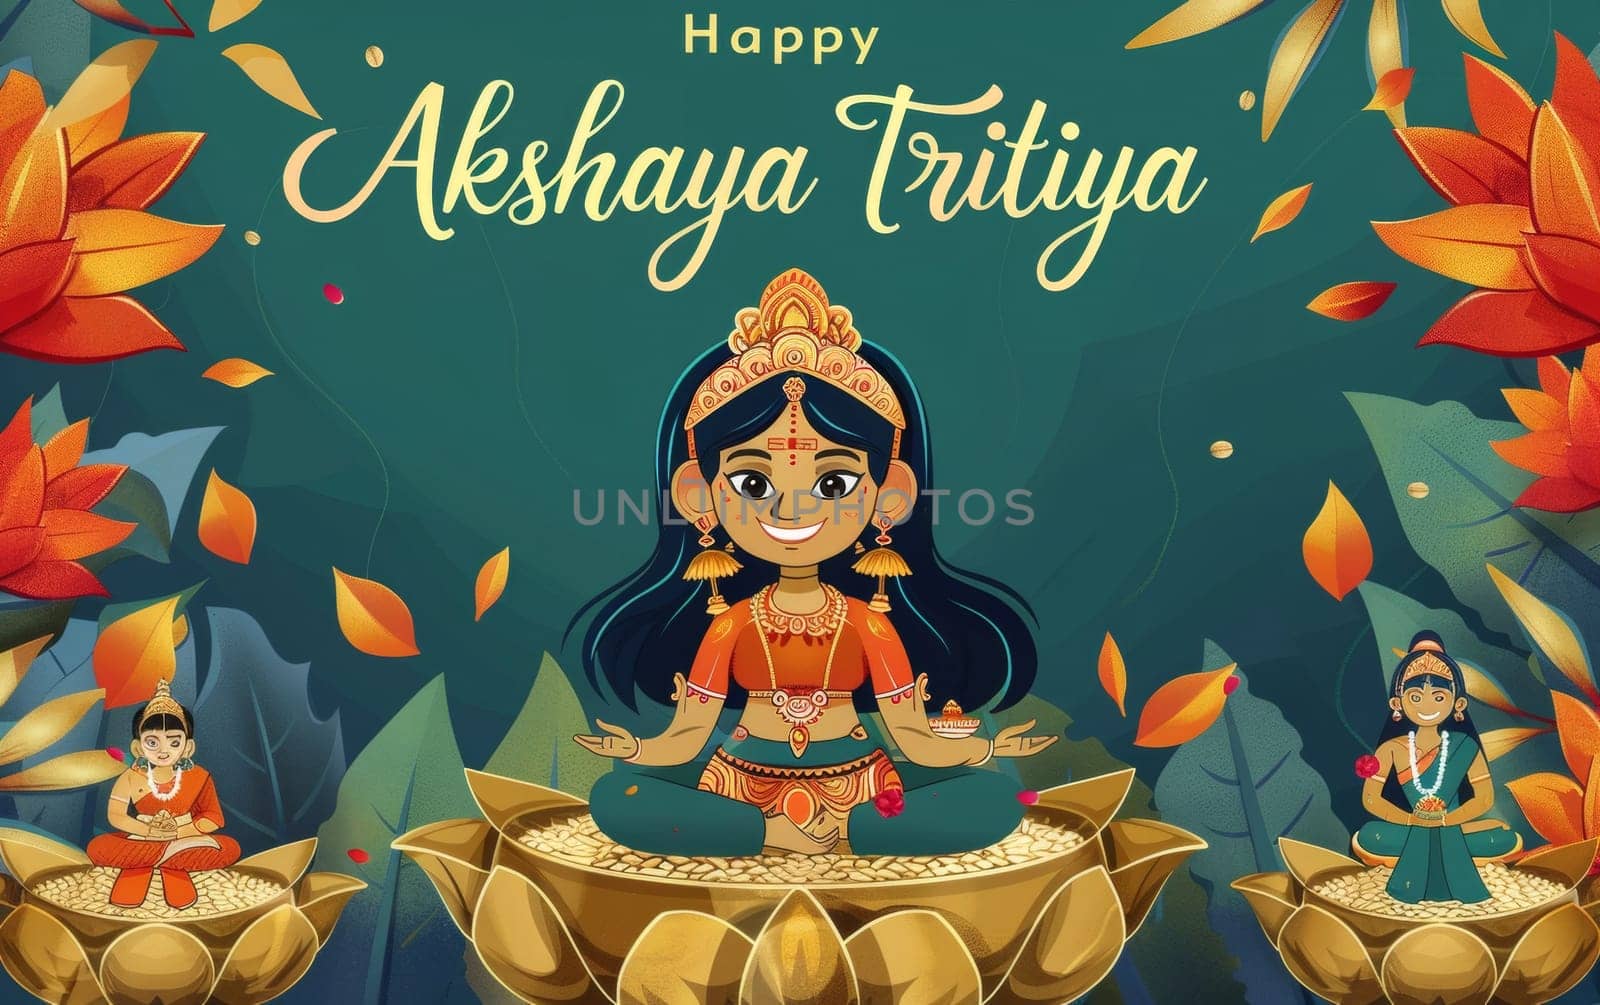 Charming Akshaya Tritiya greeting featuring Goddess Lakshmi seated on a golden throne surrounded by coins and festive motifs. by sfinks